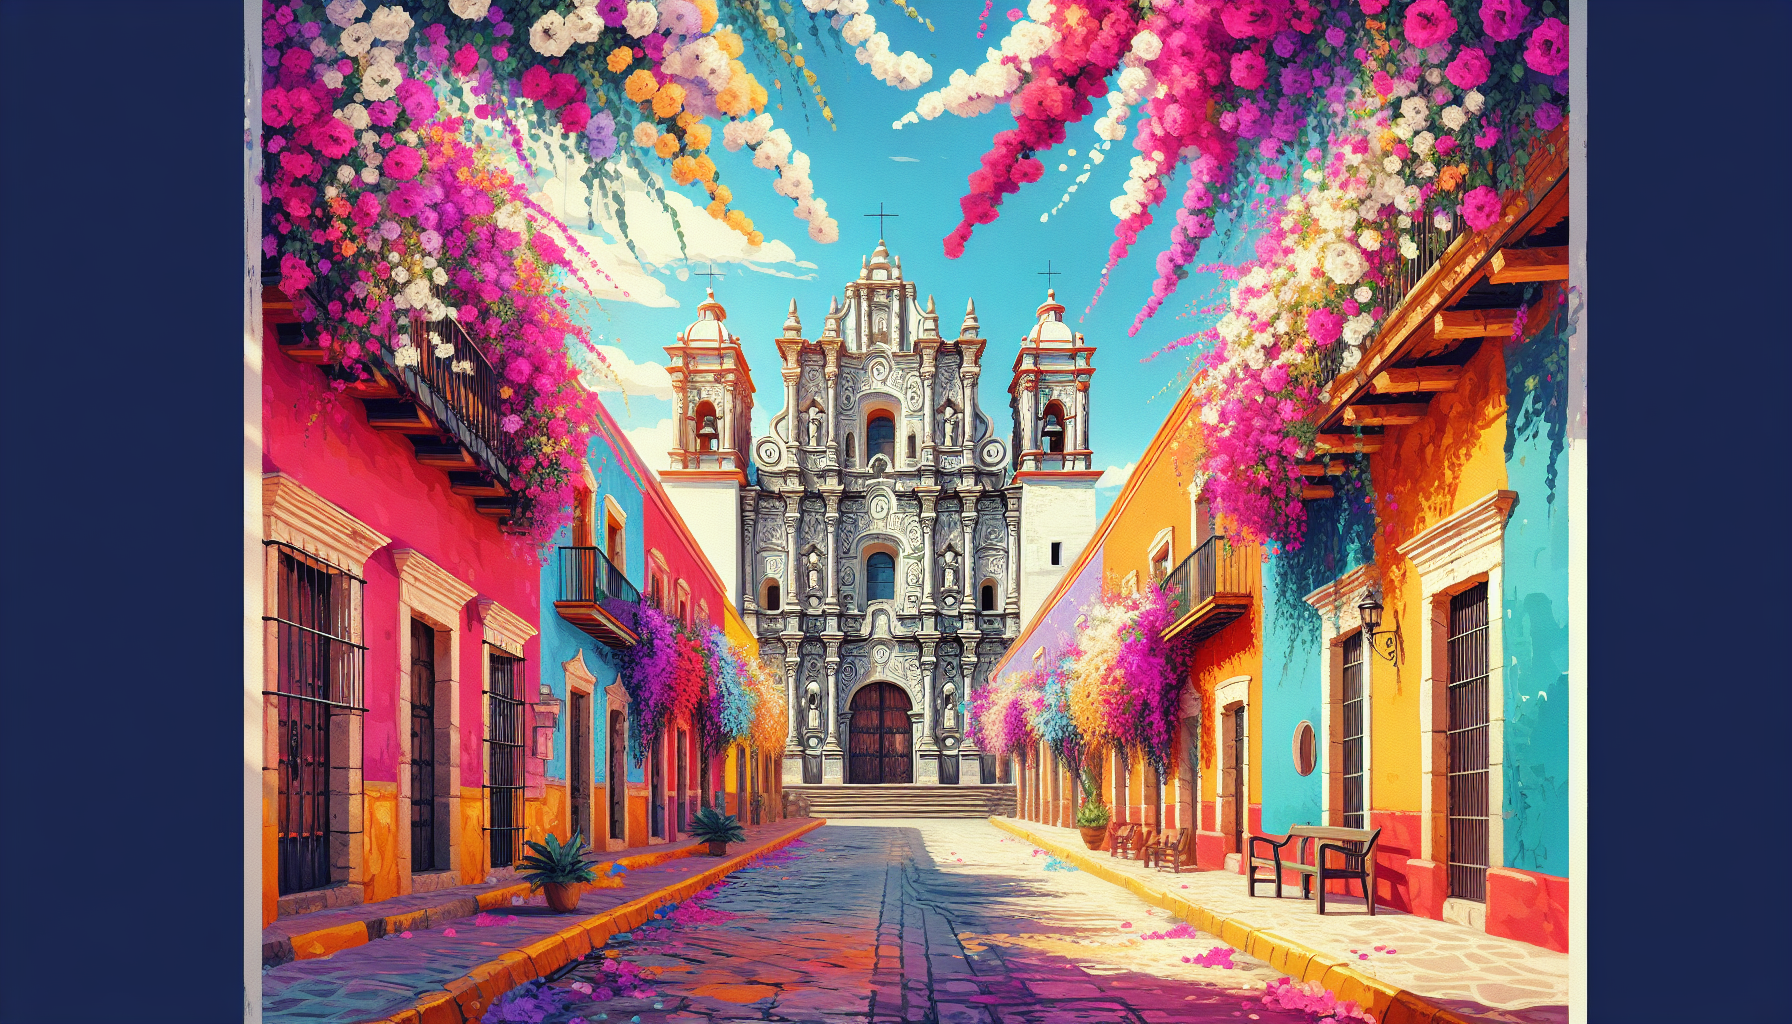 Create an image of a picturesque street in Oaxaca, Mexico with colorful buildings and vibrant bougainvillea flowers cascading down the walls, leading up to a stunning colonial-era church with intricat